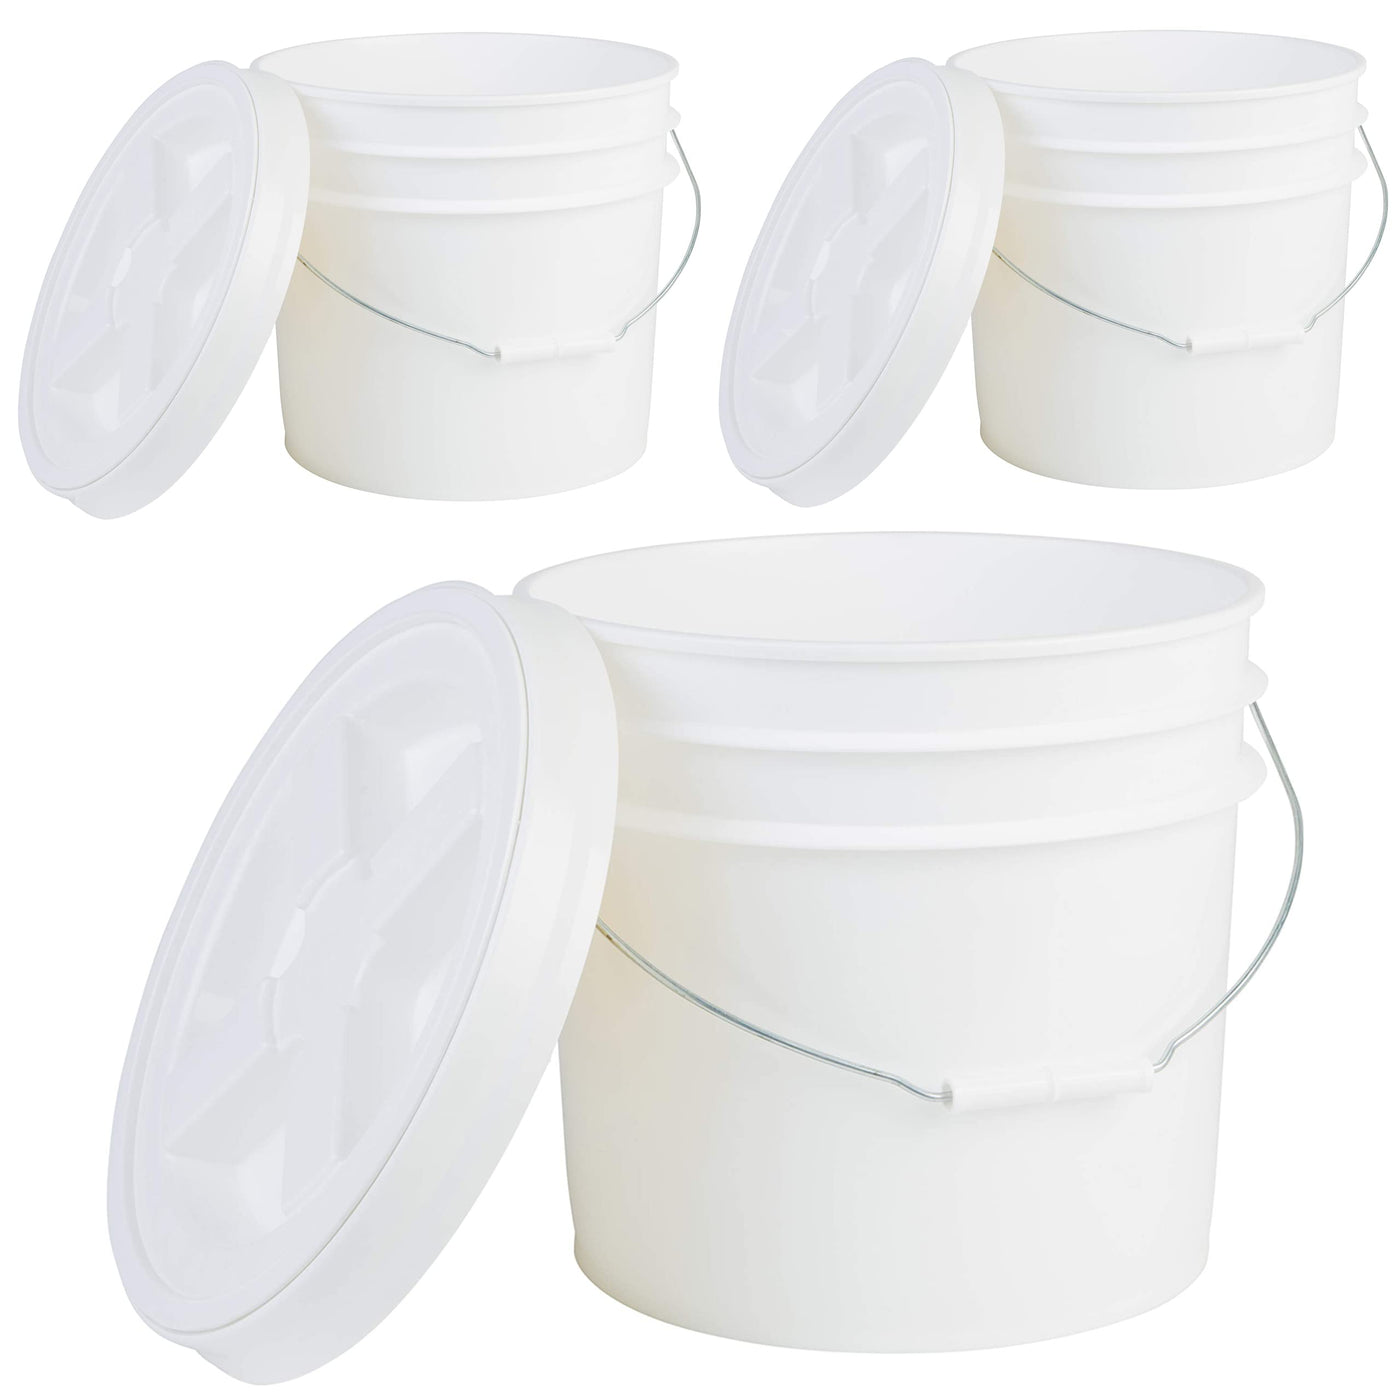 2 Gallon White Bucket With Gamma Seal Lid Free Shipping